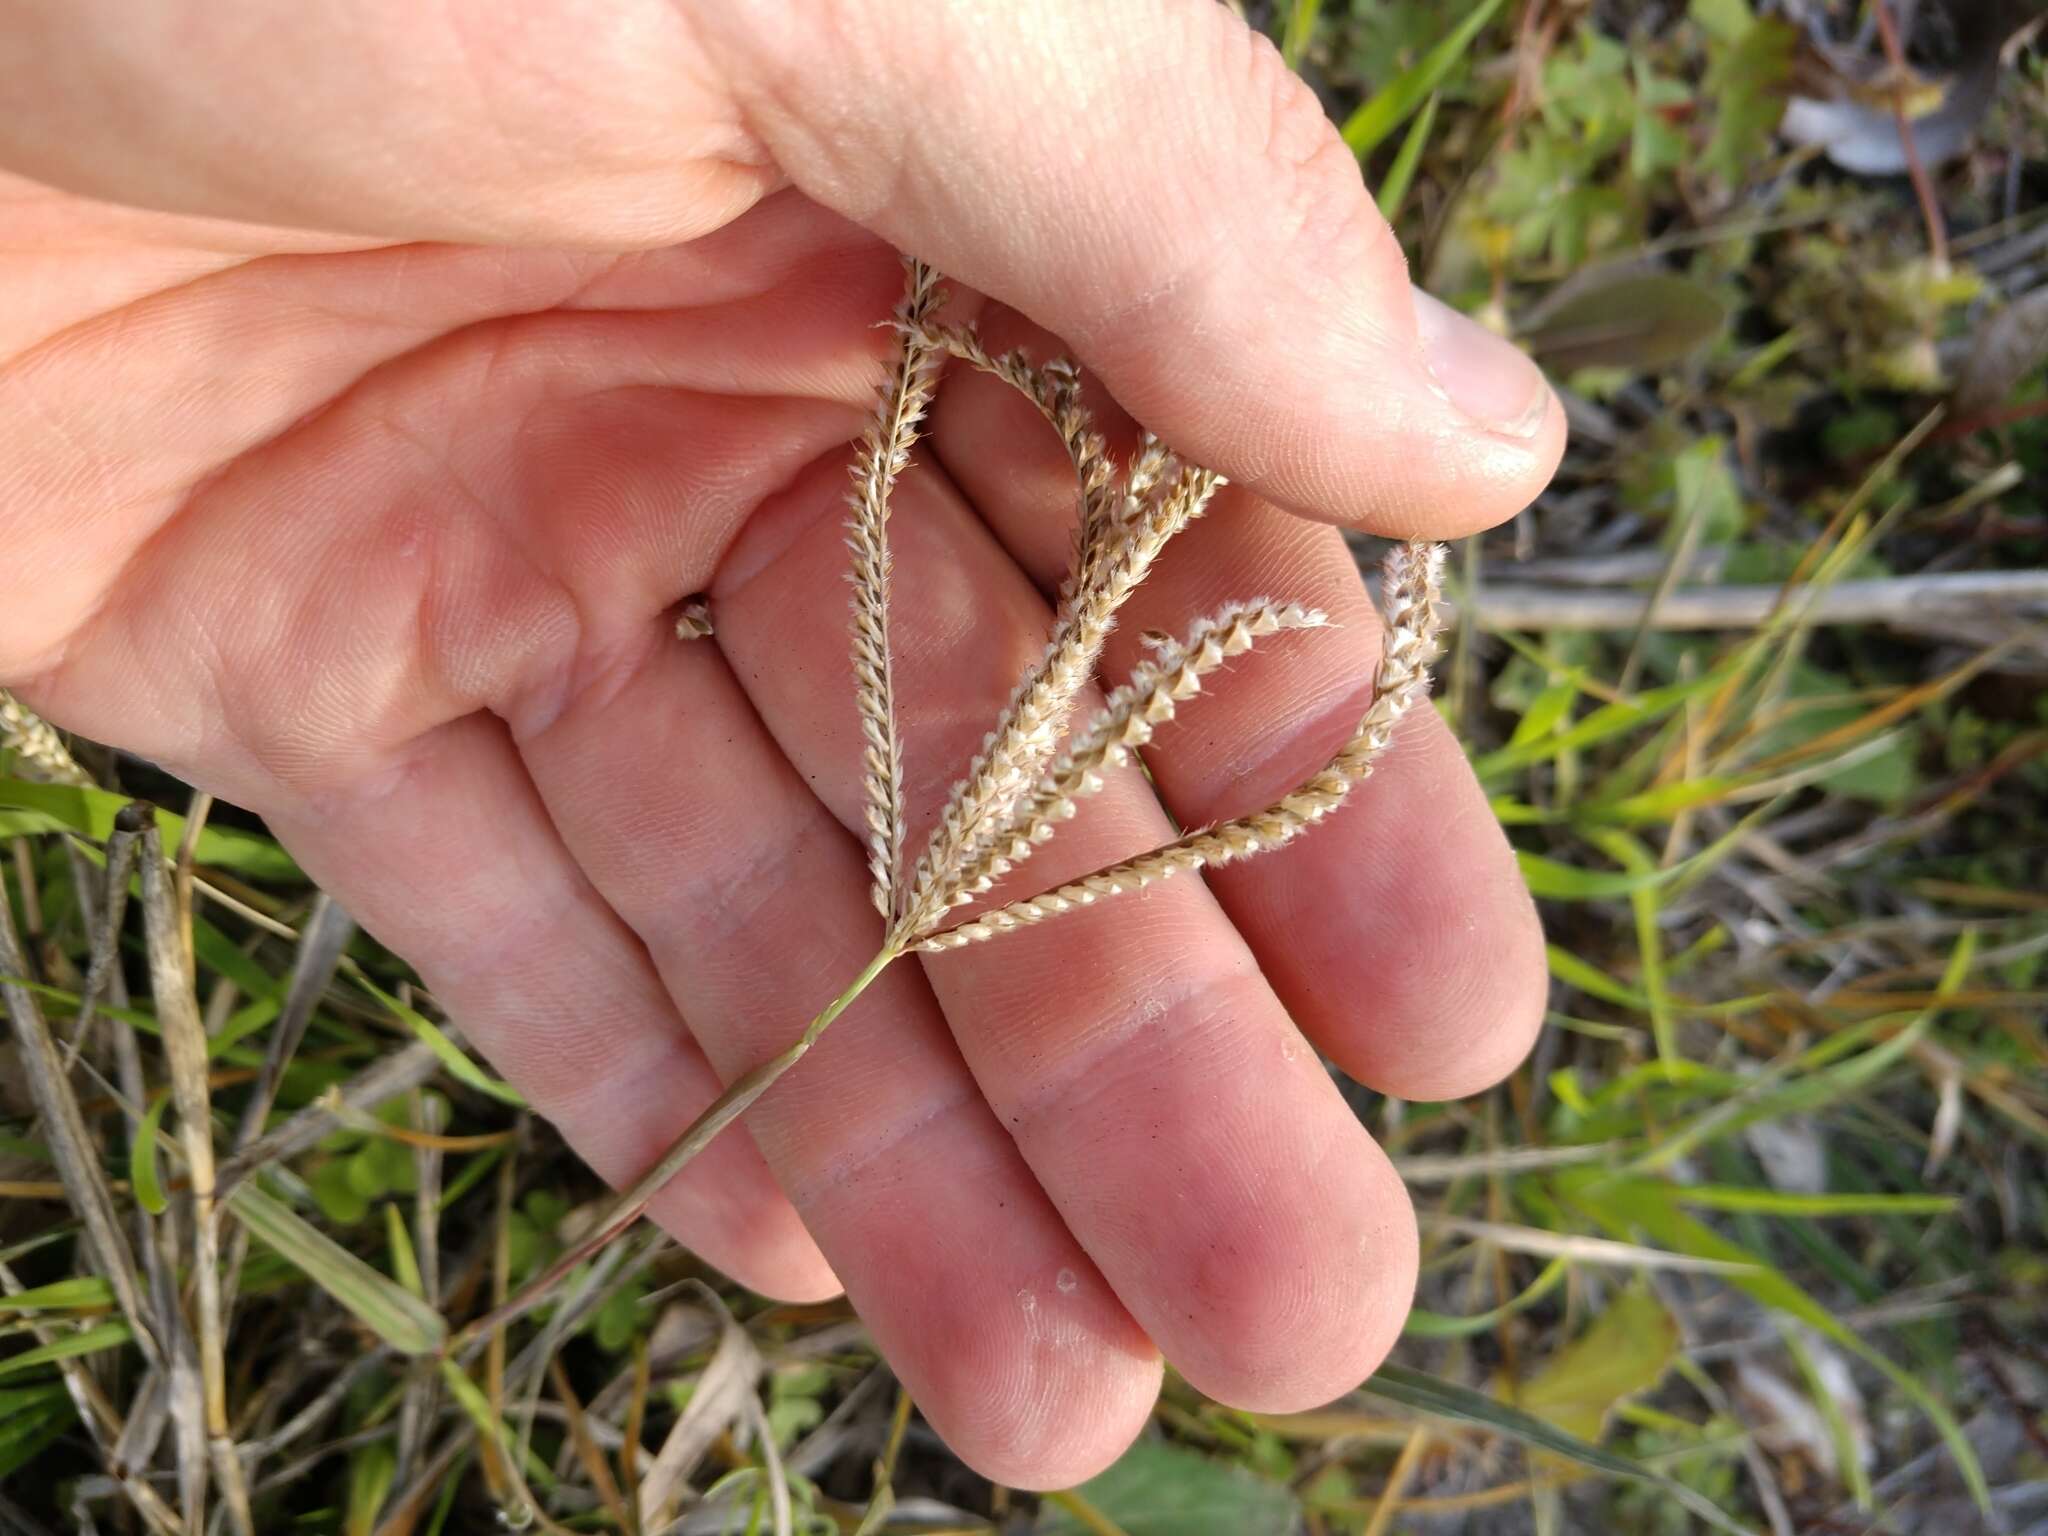 Image of Fringed Windmill Grass